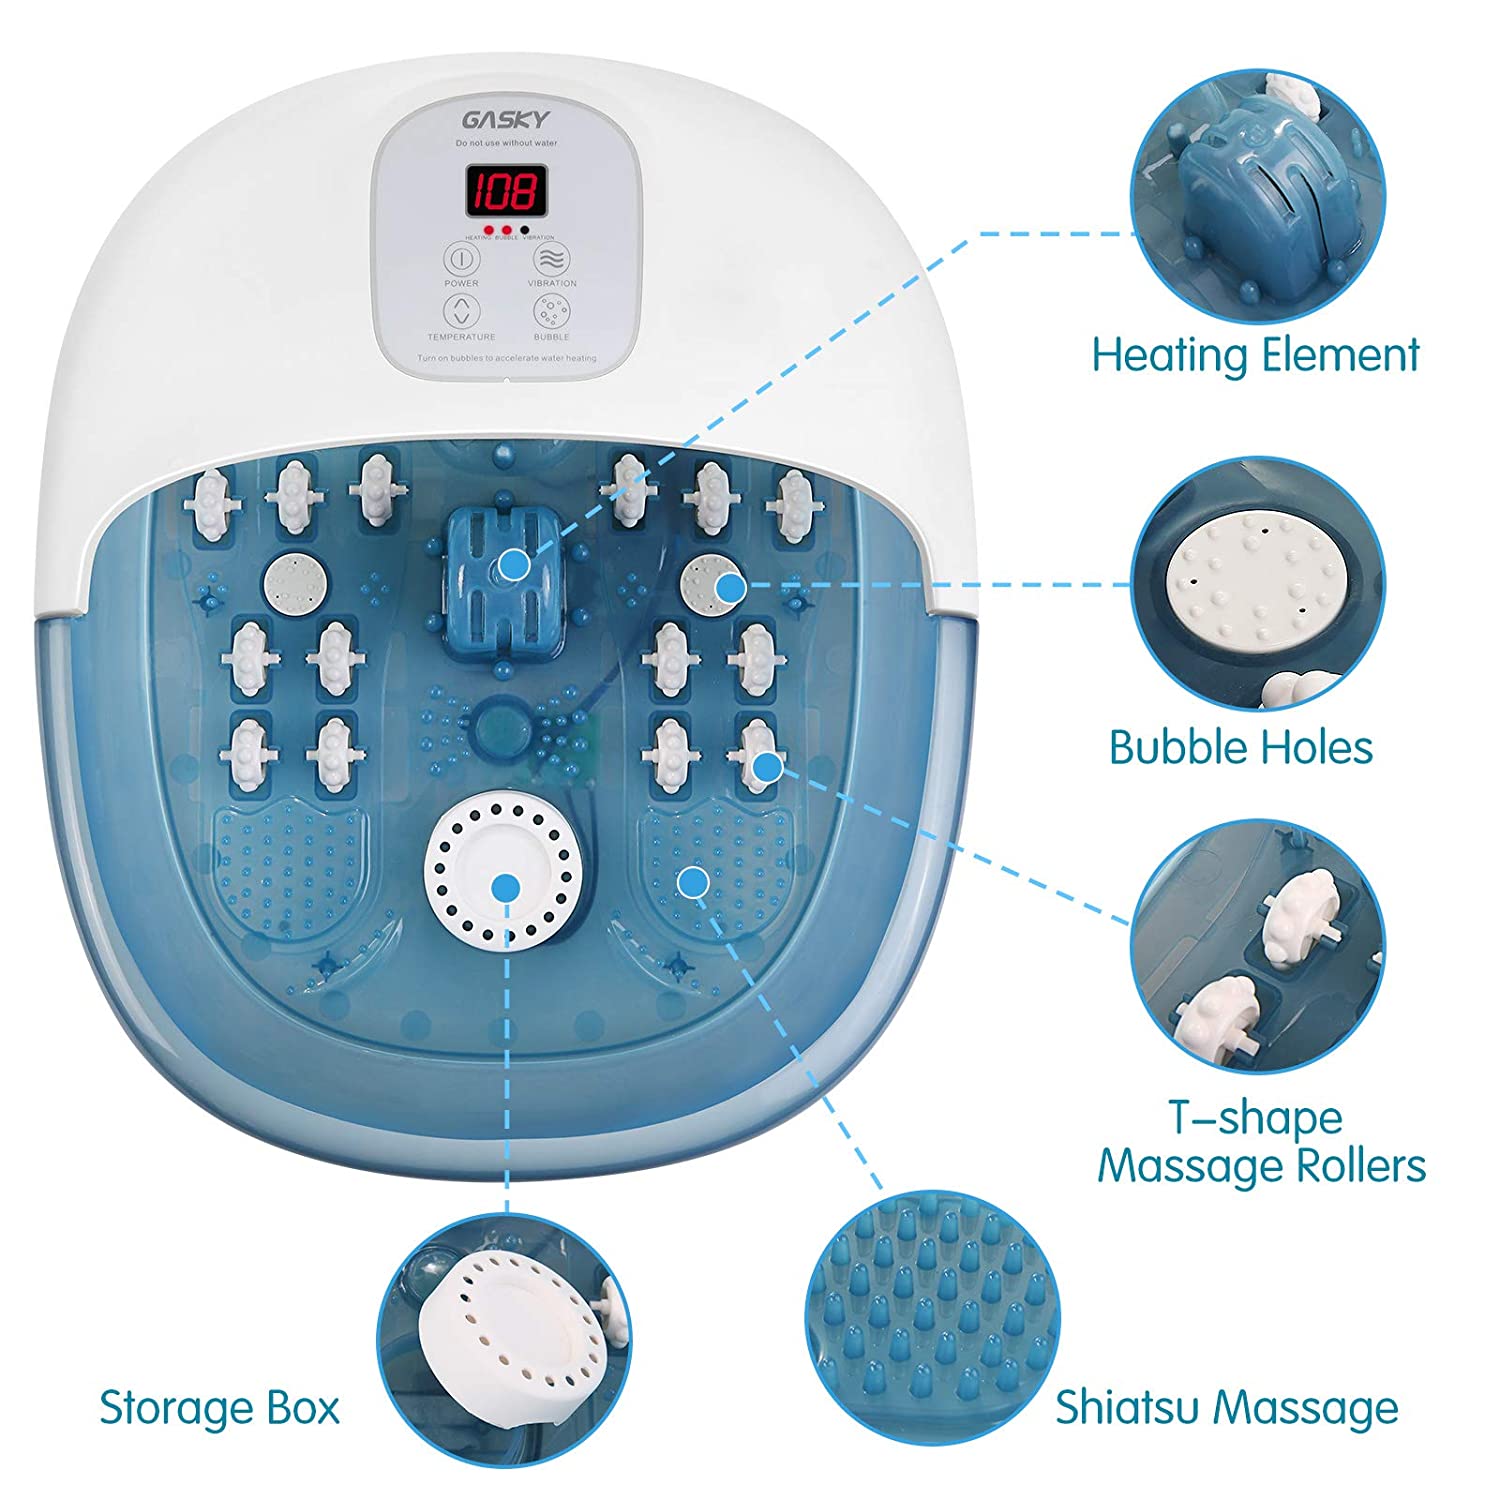 Load image into Gallery viewer, Foot Spa Bath Massager with Heat Bubbles Vibration, 14 Shiatsu Massaging Rollers to Relax Tired Feet, Adjustable Temperature Pedicure Tub for Home Office Use - NAIPO
